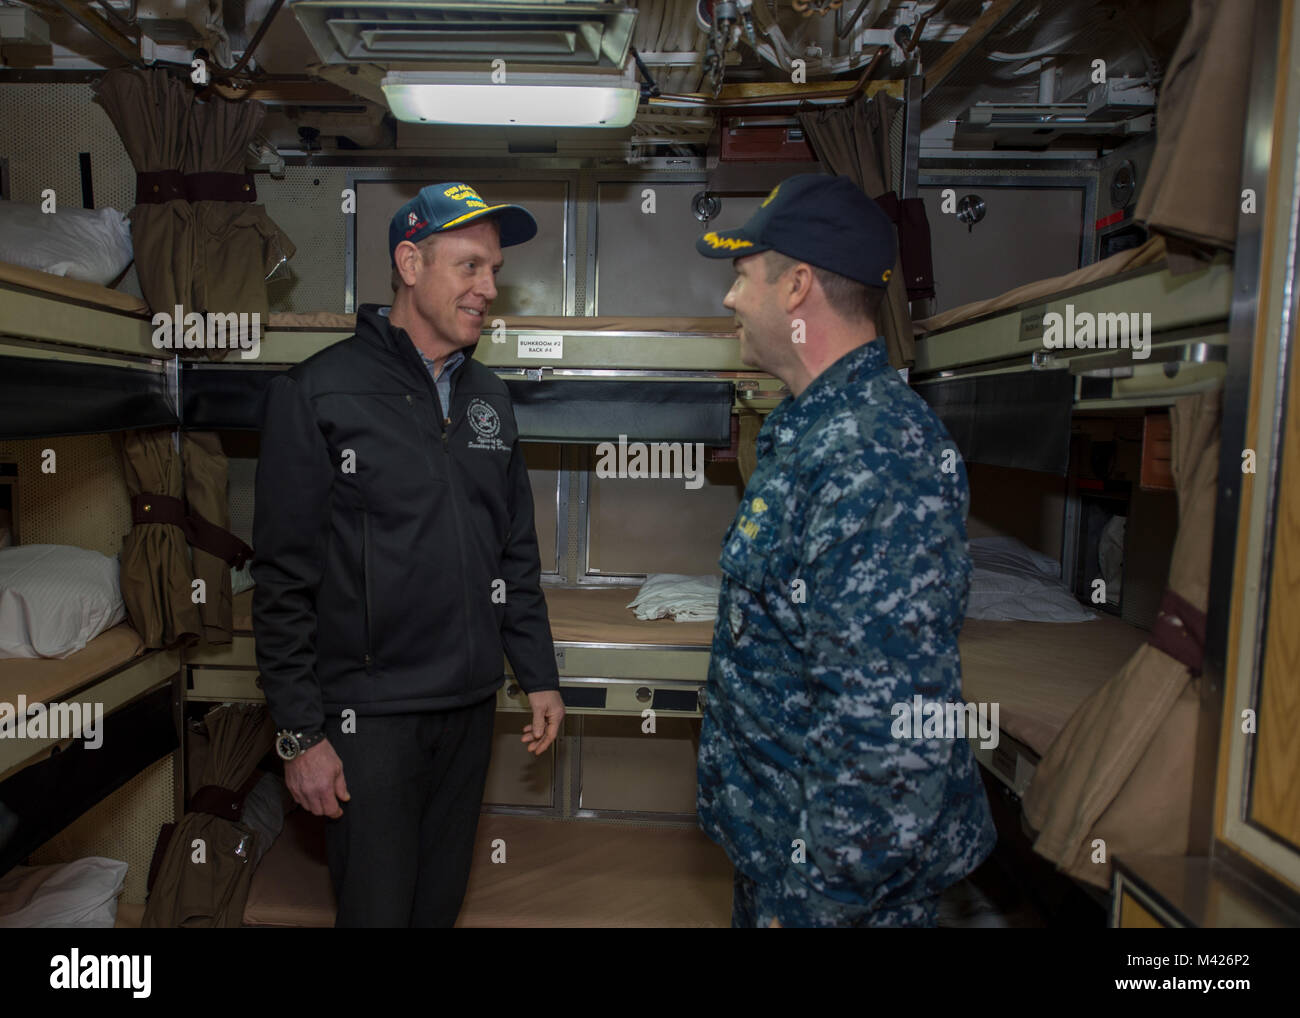 BANGOR, Wash. (Feb. 9, 2018) Cmdr. Jeffery Yackeren commanding officer to Ohio-class ballistic missile submarine USS Alabama (SSBN 731), shows  Deputy Secretary of Defense Patrick Shanahan sailors living quarters. Alabama is one of eight ballistic-missile submarines stationed at the base, providing the most survivable leg of the strategic deterrence triad for the United States.   (U.S. Navy photo by Mass Communication Specialist 2nd Class Nancy C. diBenedetto/Released) Stock Photo